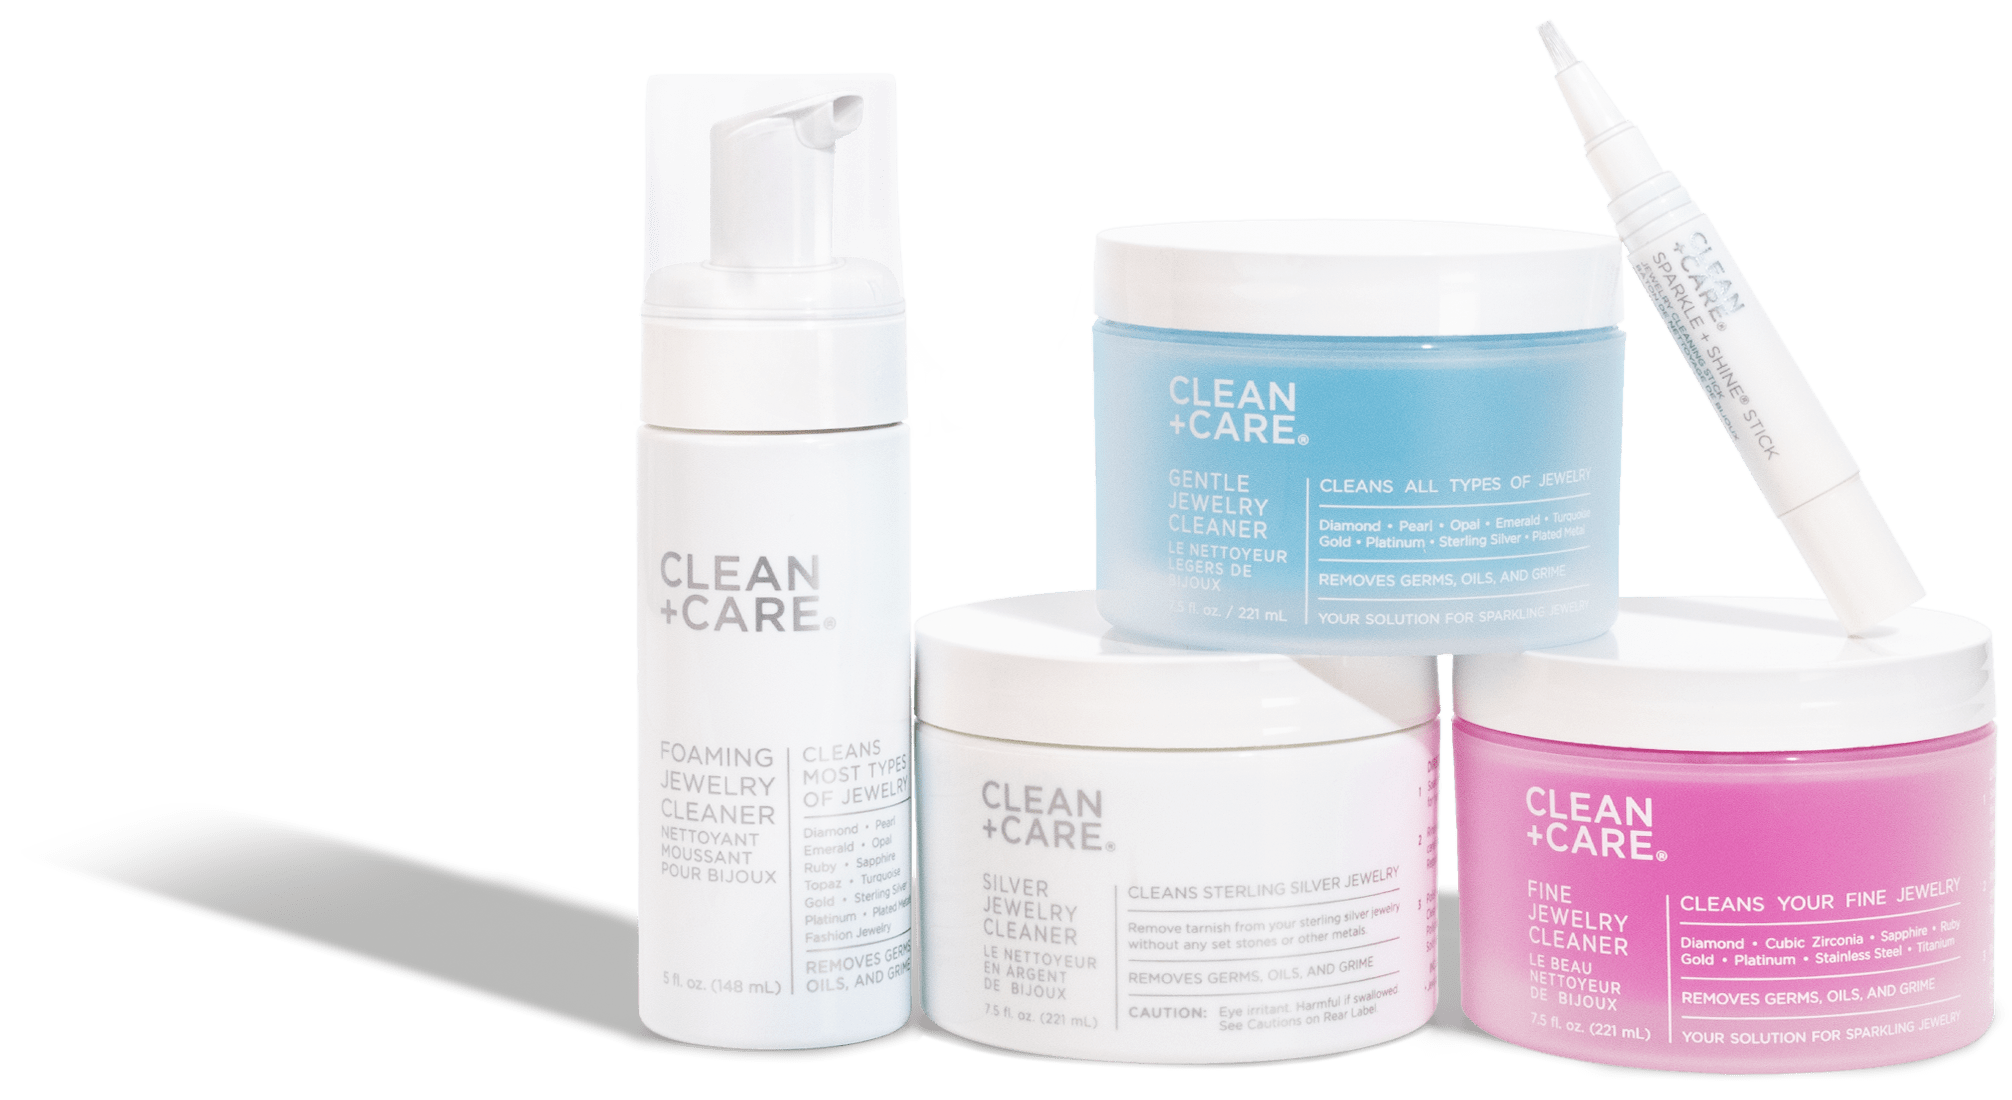 Clean + Care Jewelry Cleaner - The Kingswood Company